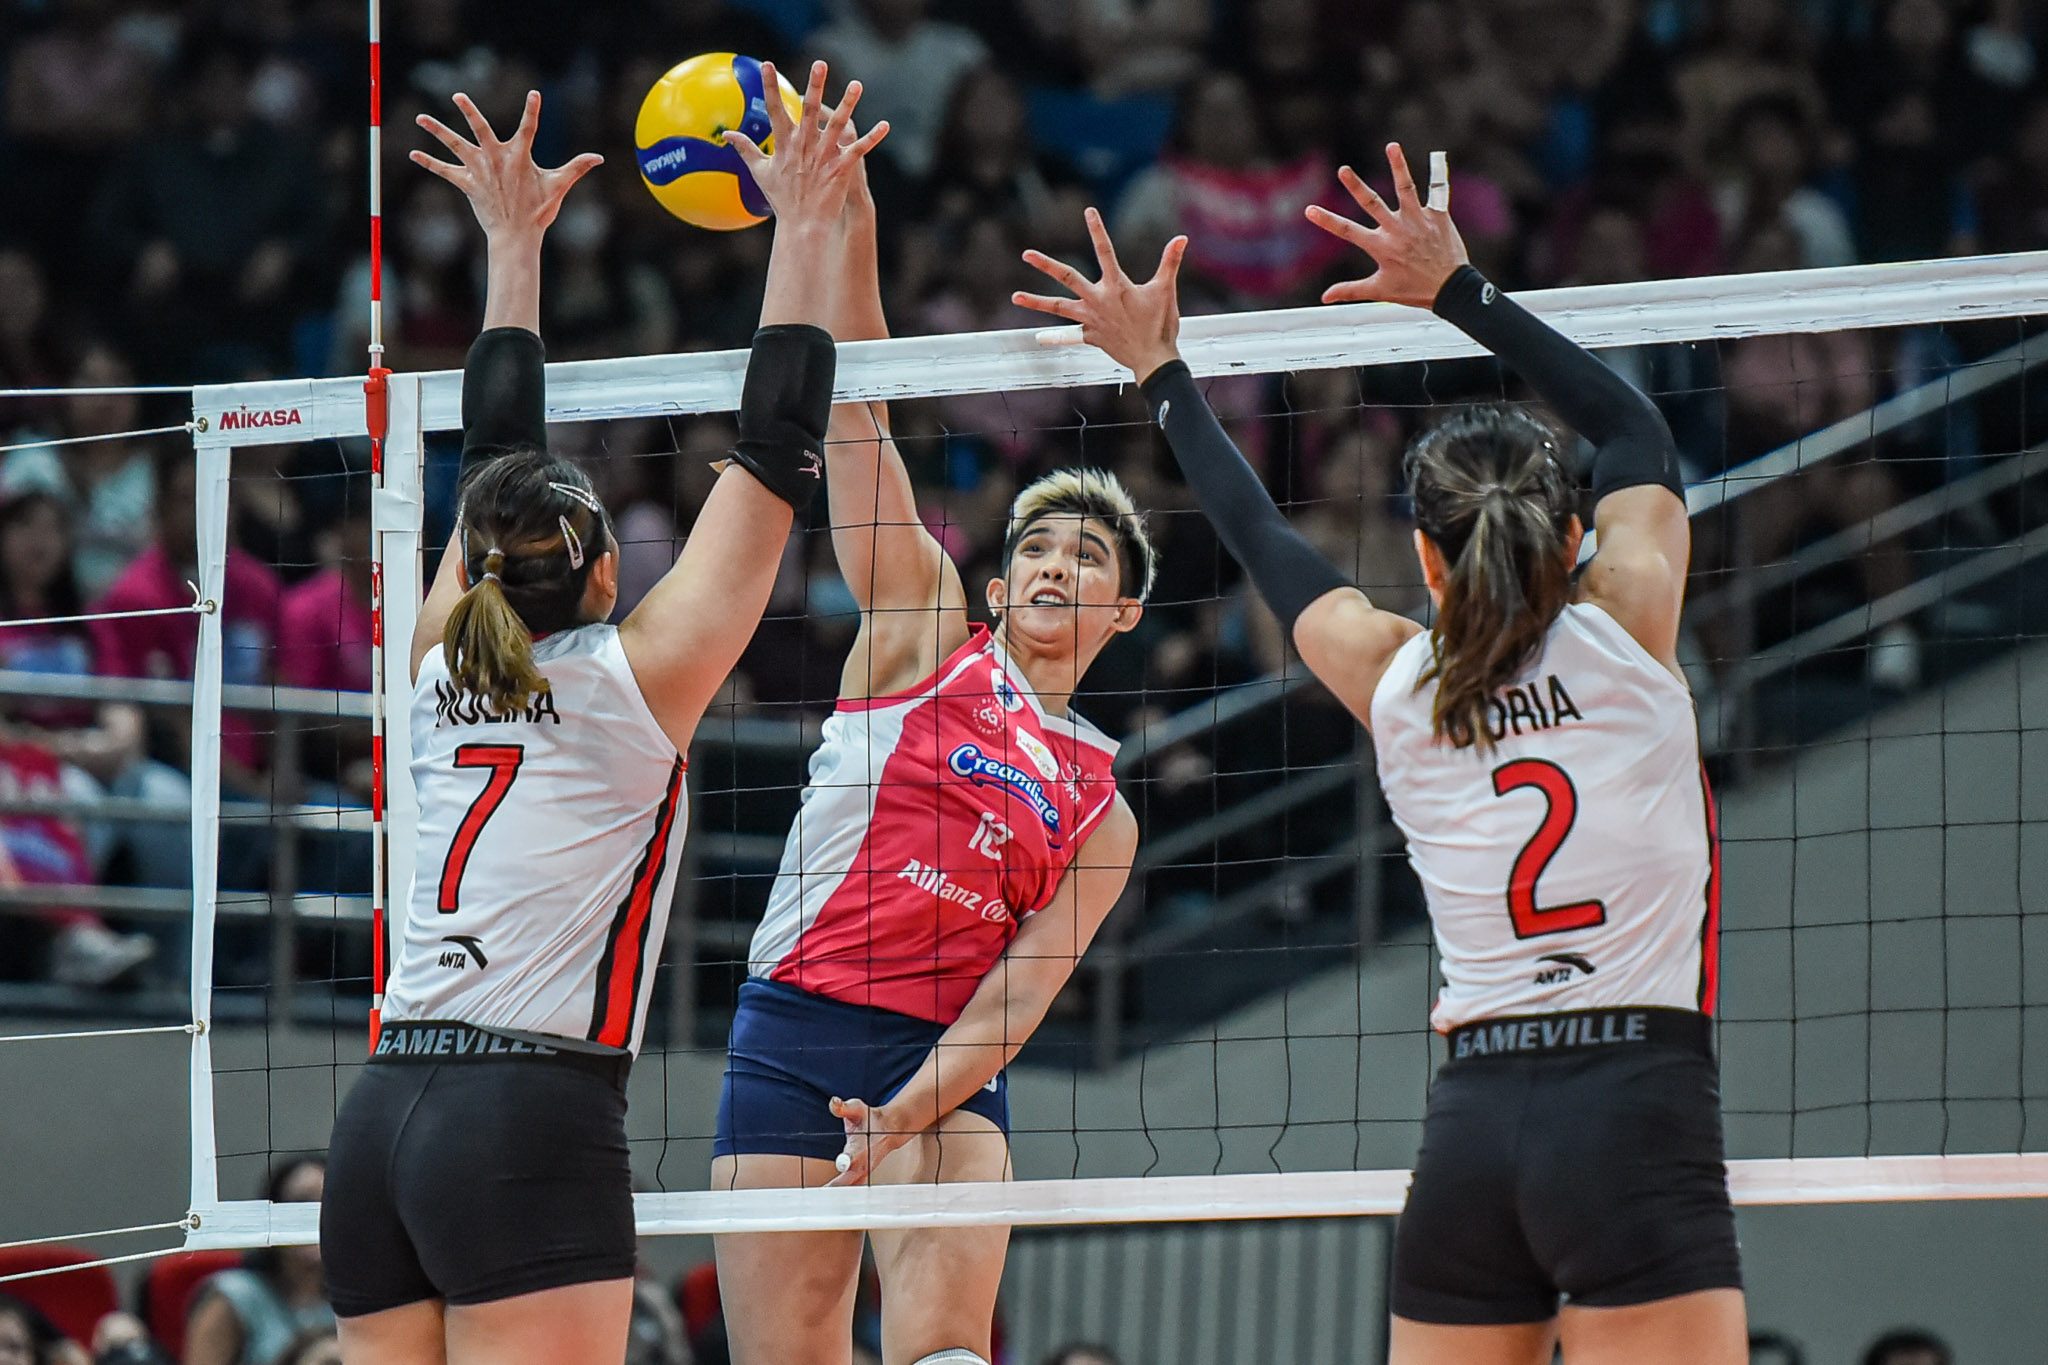 MVP Carlos erupts for PVL local-high 38 in Creamline 5-set stunner over Cignal